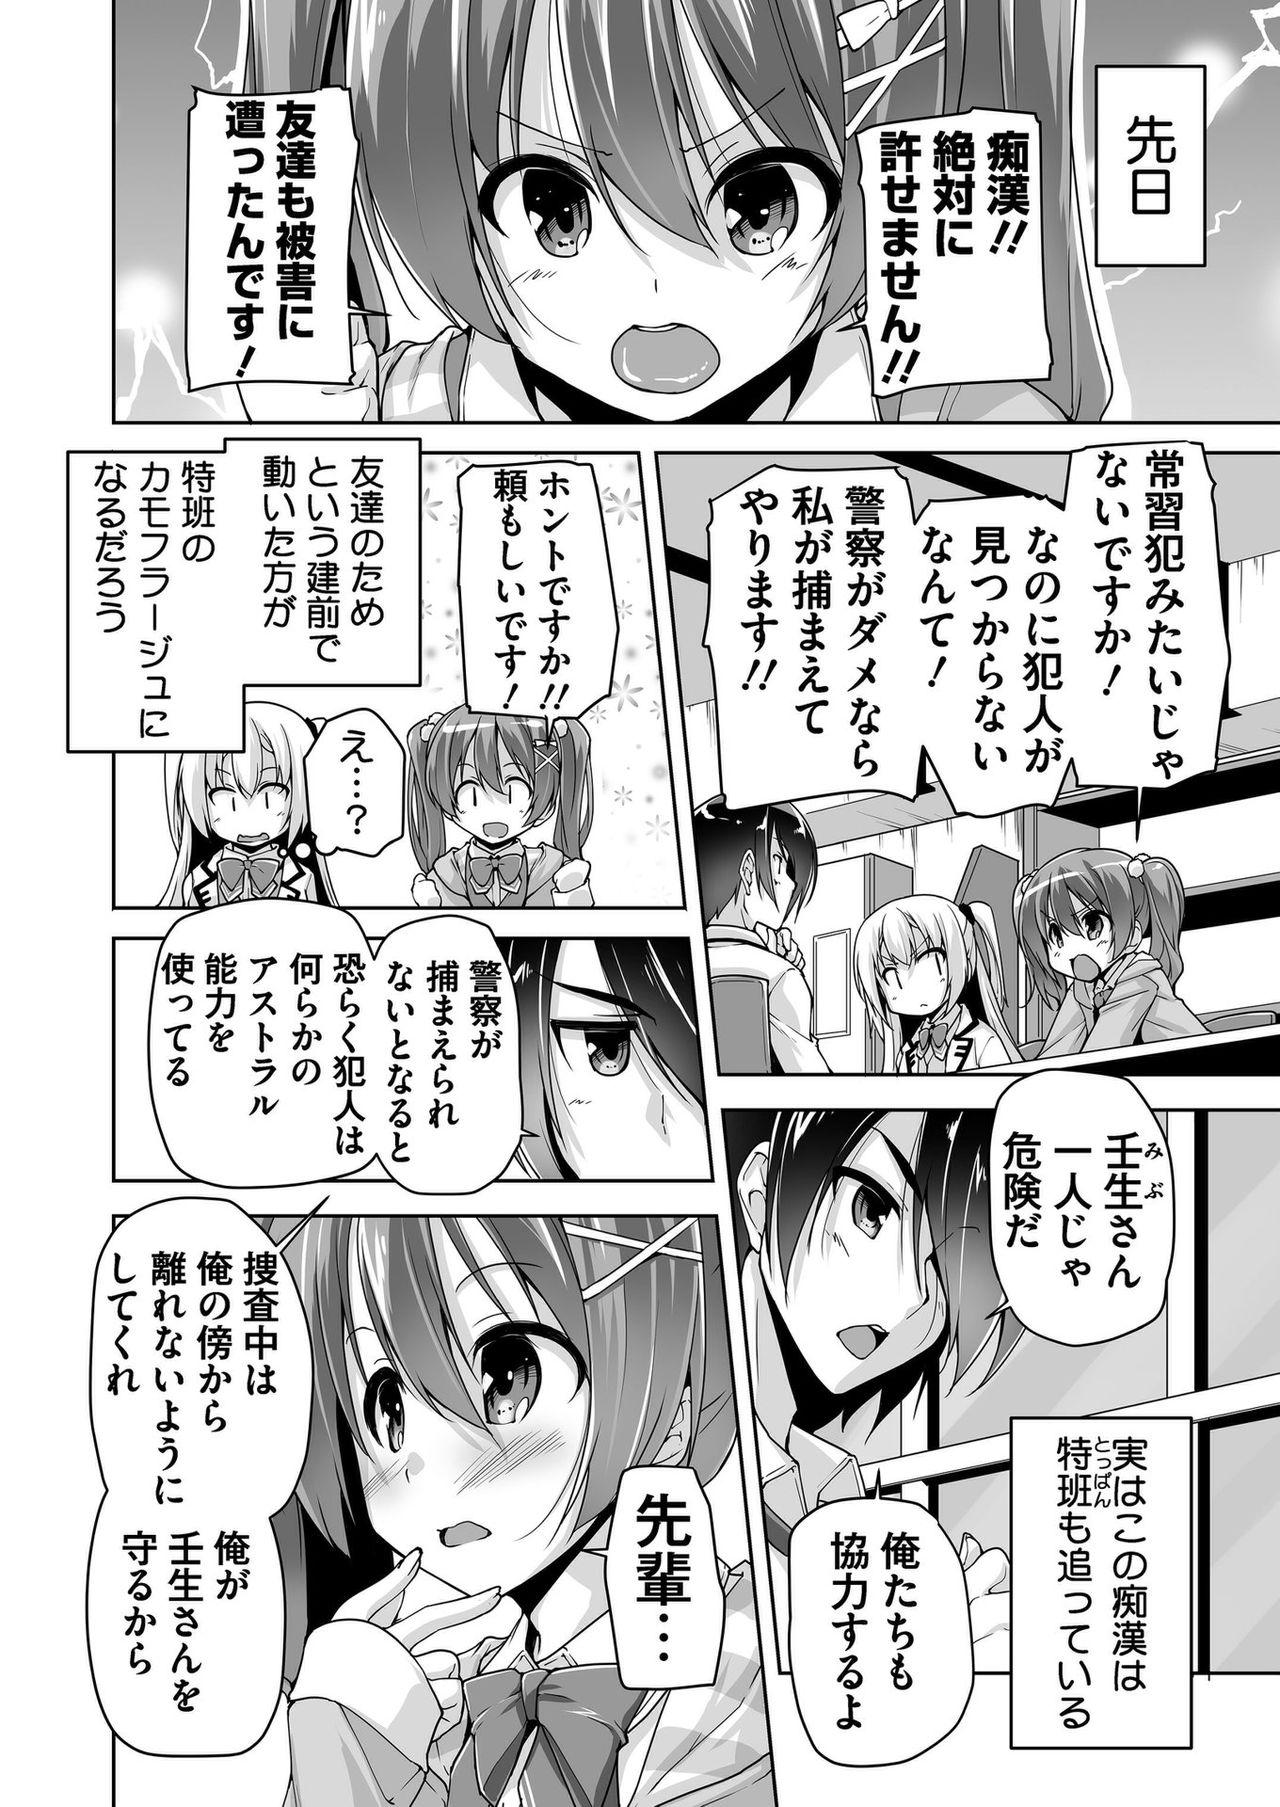 Rimjob Chisaki to chikan play de hatsu H! ? - Riddle joker Belly - Page 2